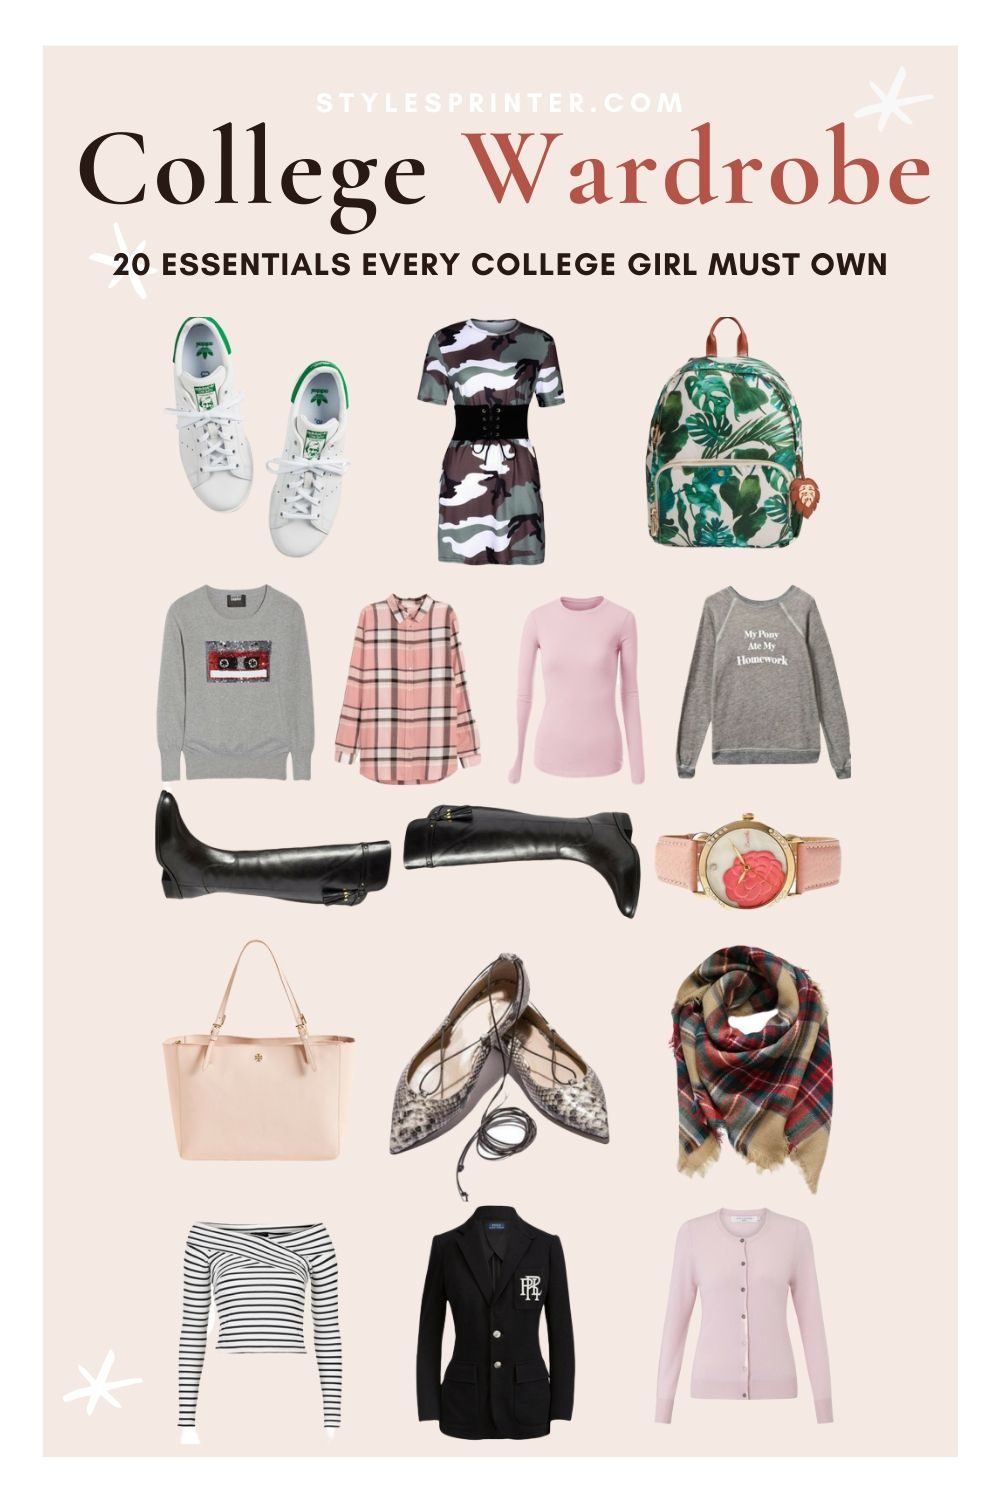 17 Things That You Should Keep in Your Purse - College Fashion